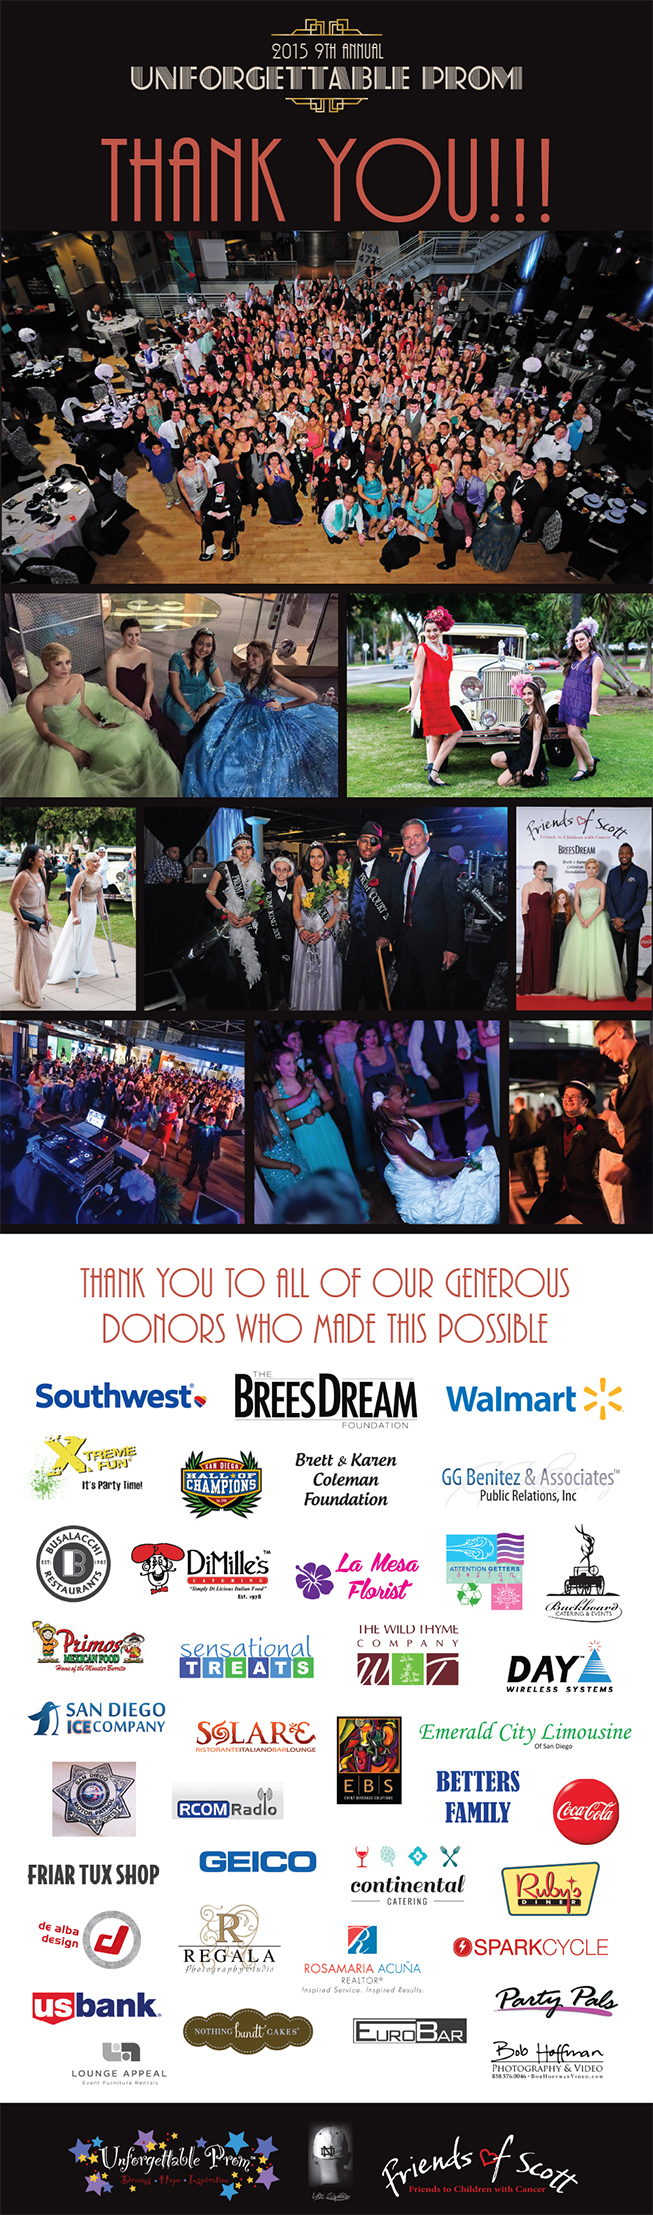 Newsletter 2015 9th Annual Unforgettable Prom :: Thank You!